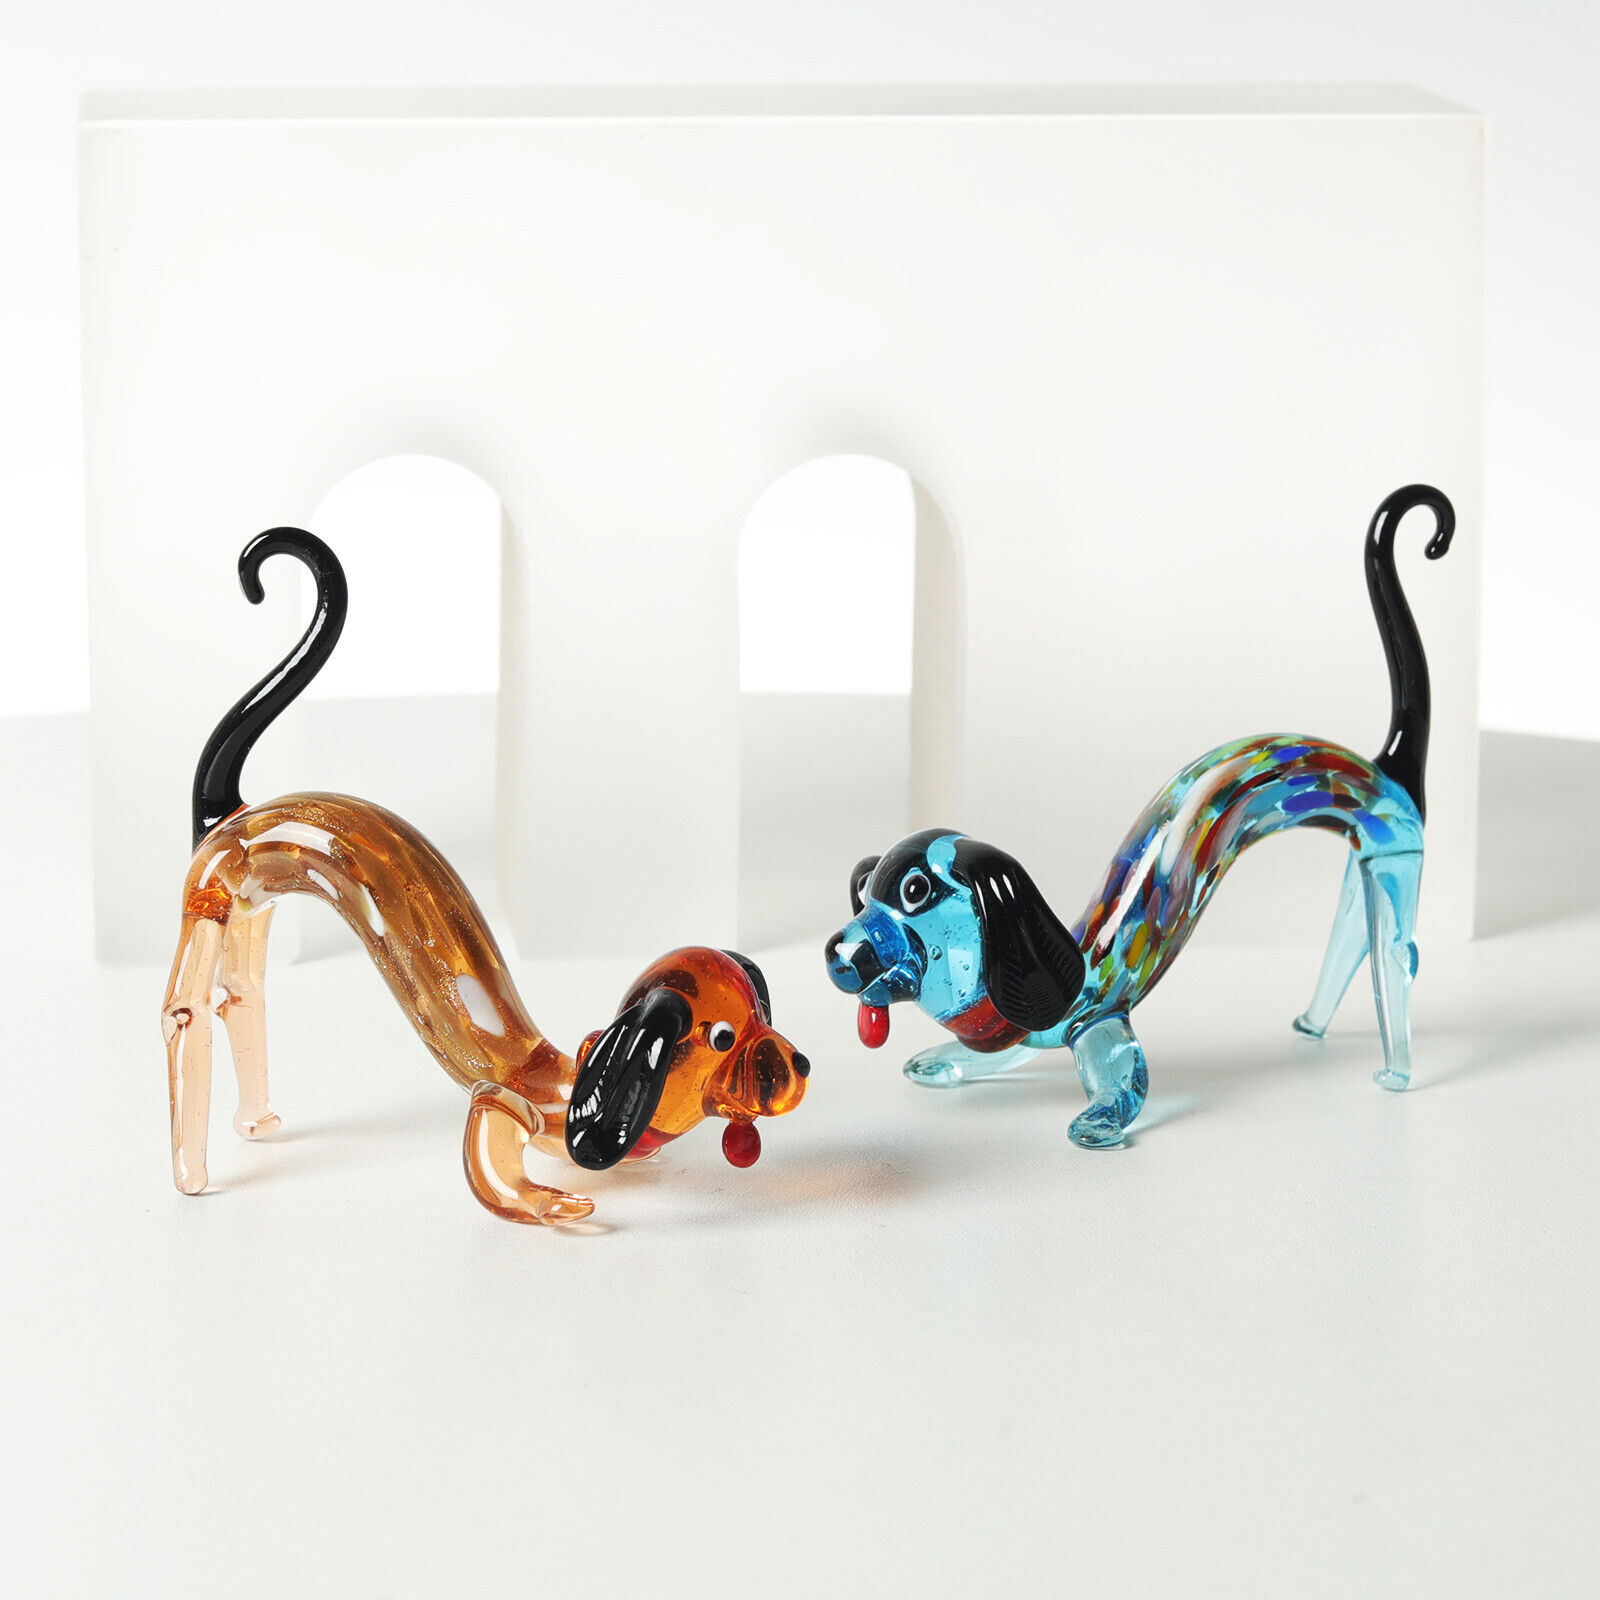 2Pcs Color Crystal Dachshund Dog Figurine Collectible Blown Glass Dog Ornament